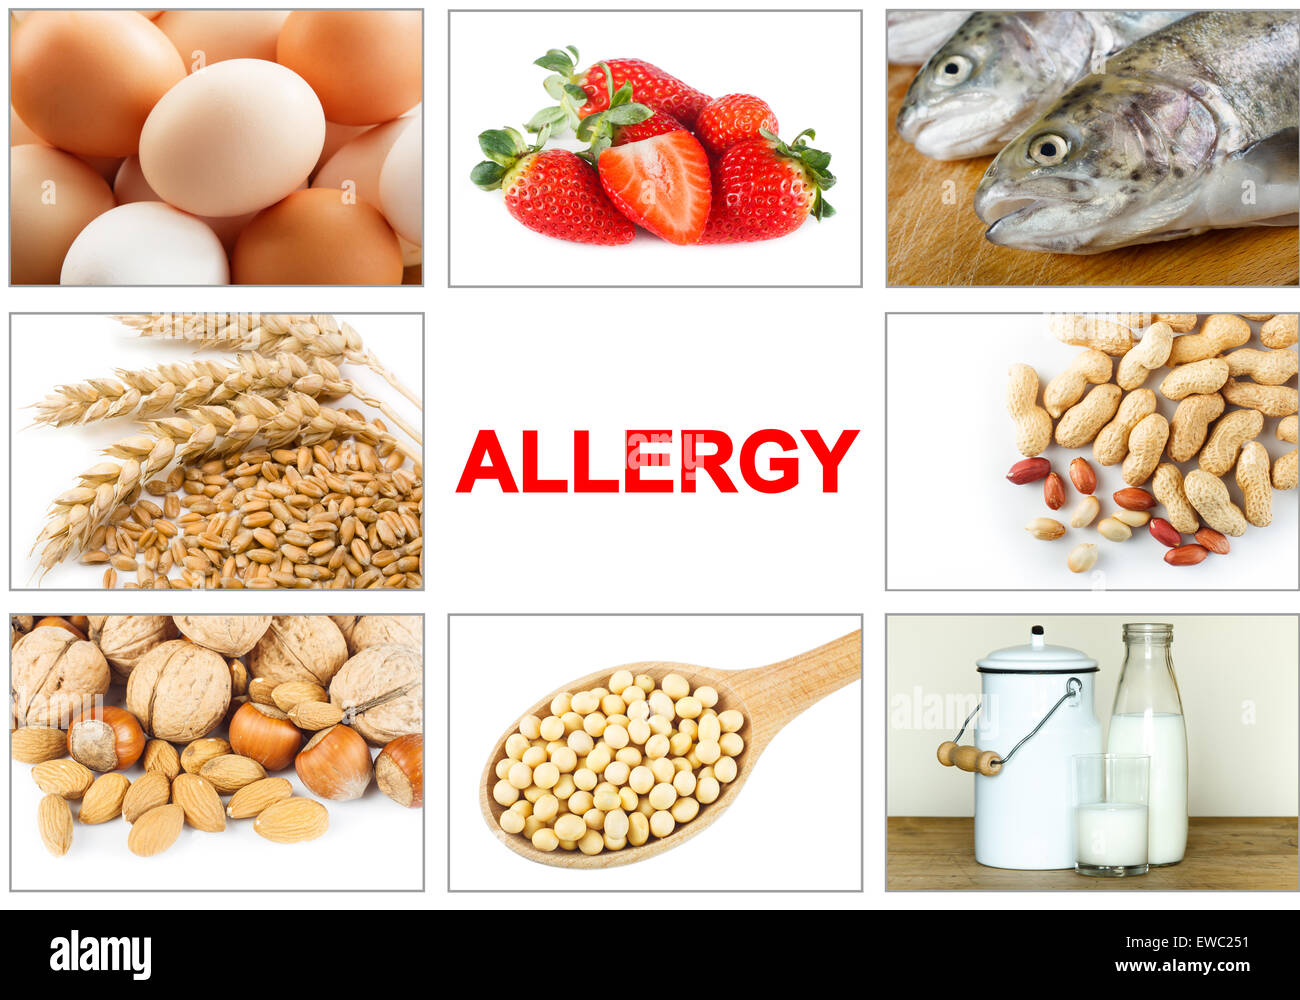 Allergy food concept. Food allergens as eggs, milk, fruit, tree nuts, peanut, soy, wheat and fish. Text 'ALLERGY' easy to remove Stock Photo